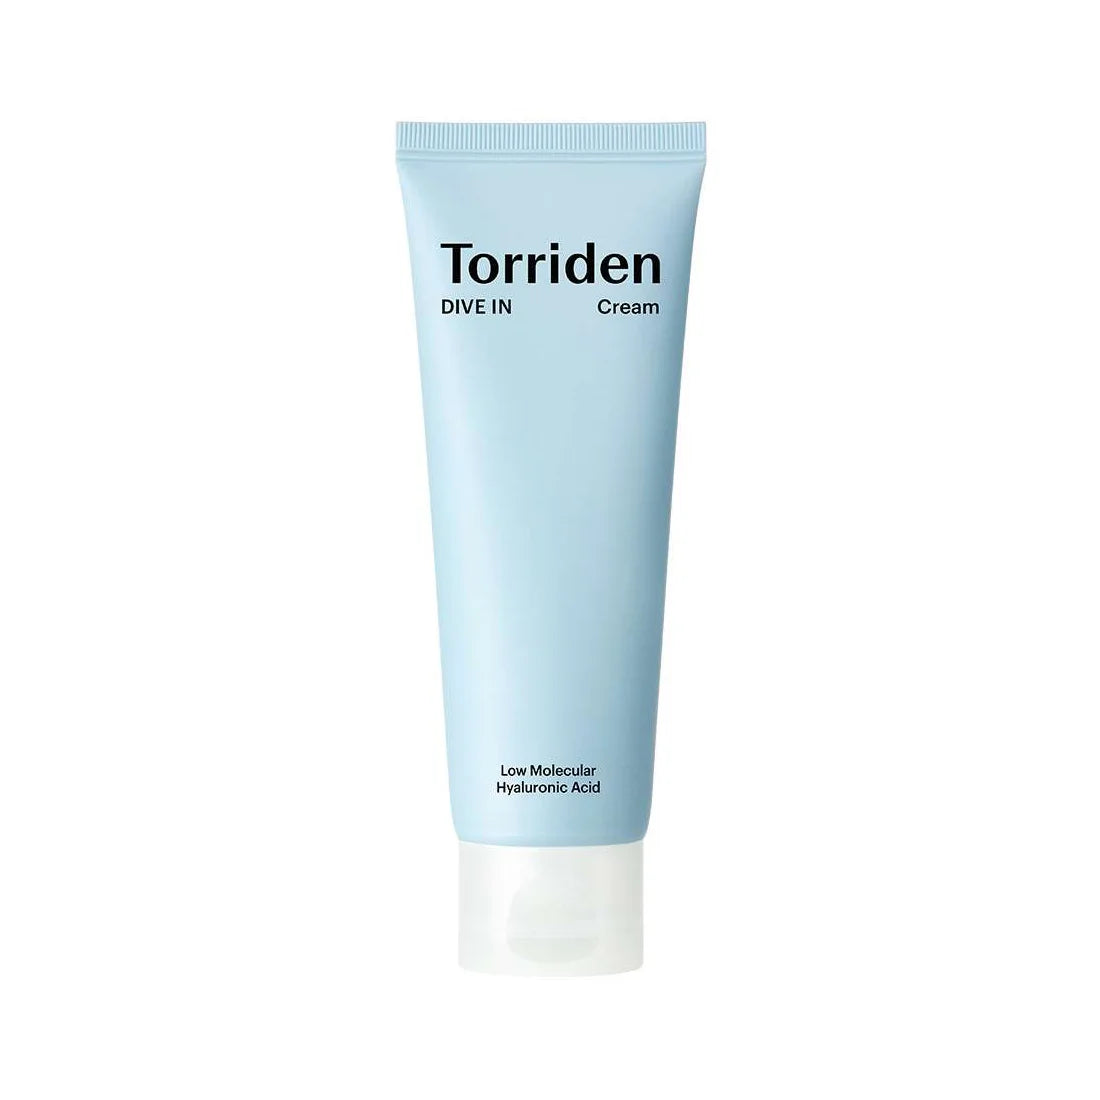 Torriden DIVE-IN Low Molecular Hyaluronic Acid Cream best Korean facial moisturizer day night cream for dry sensitive combination skin hydrating soothing solution K Beauty World